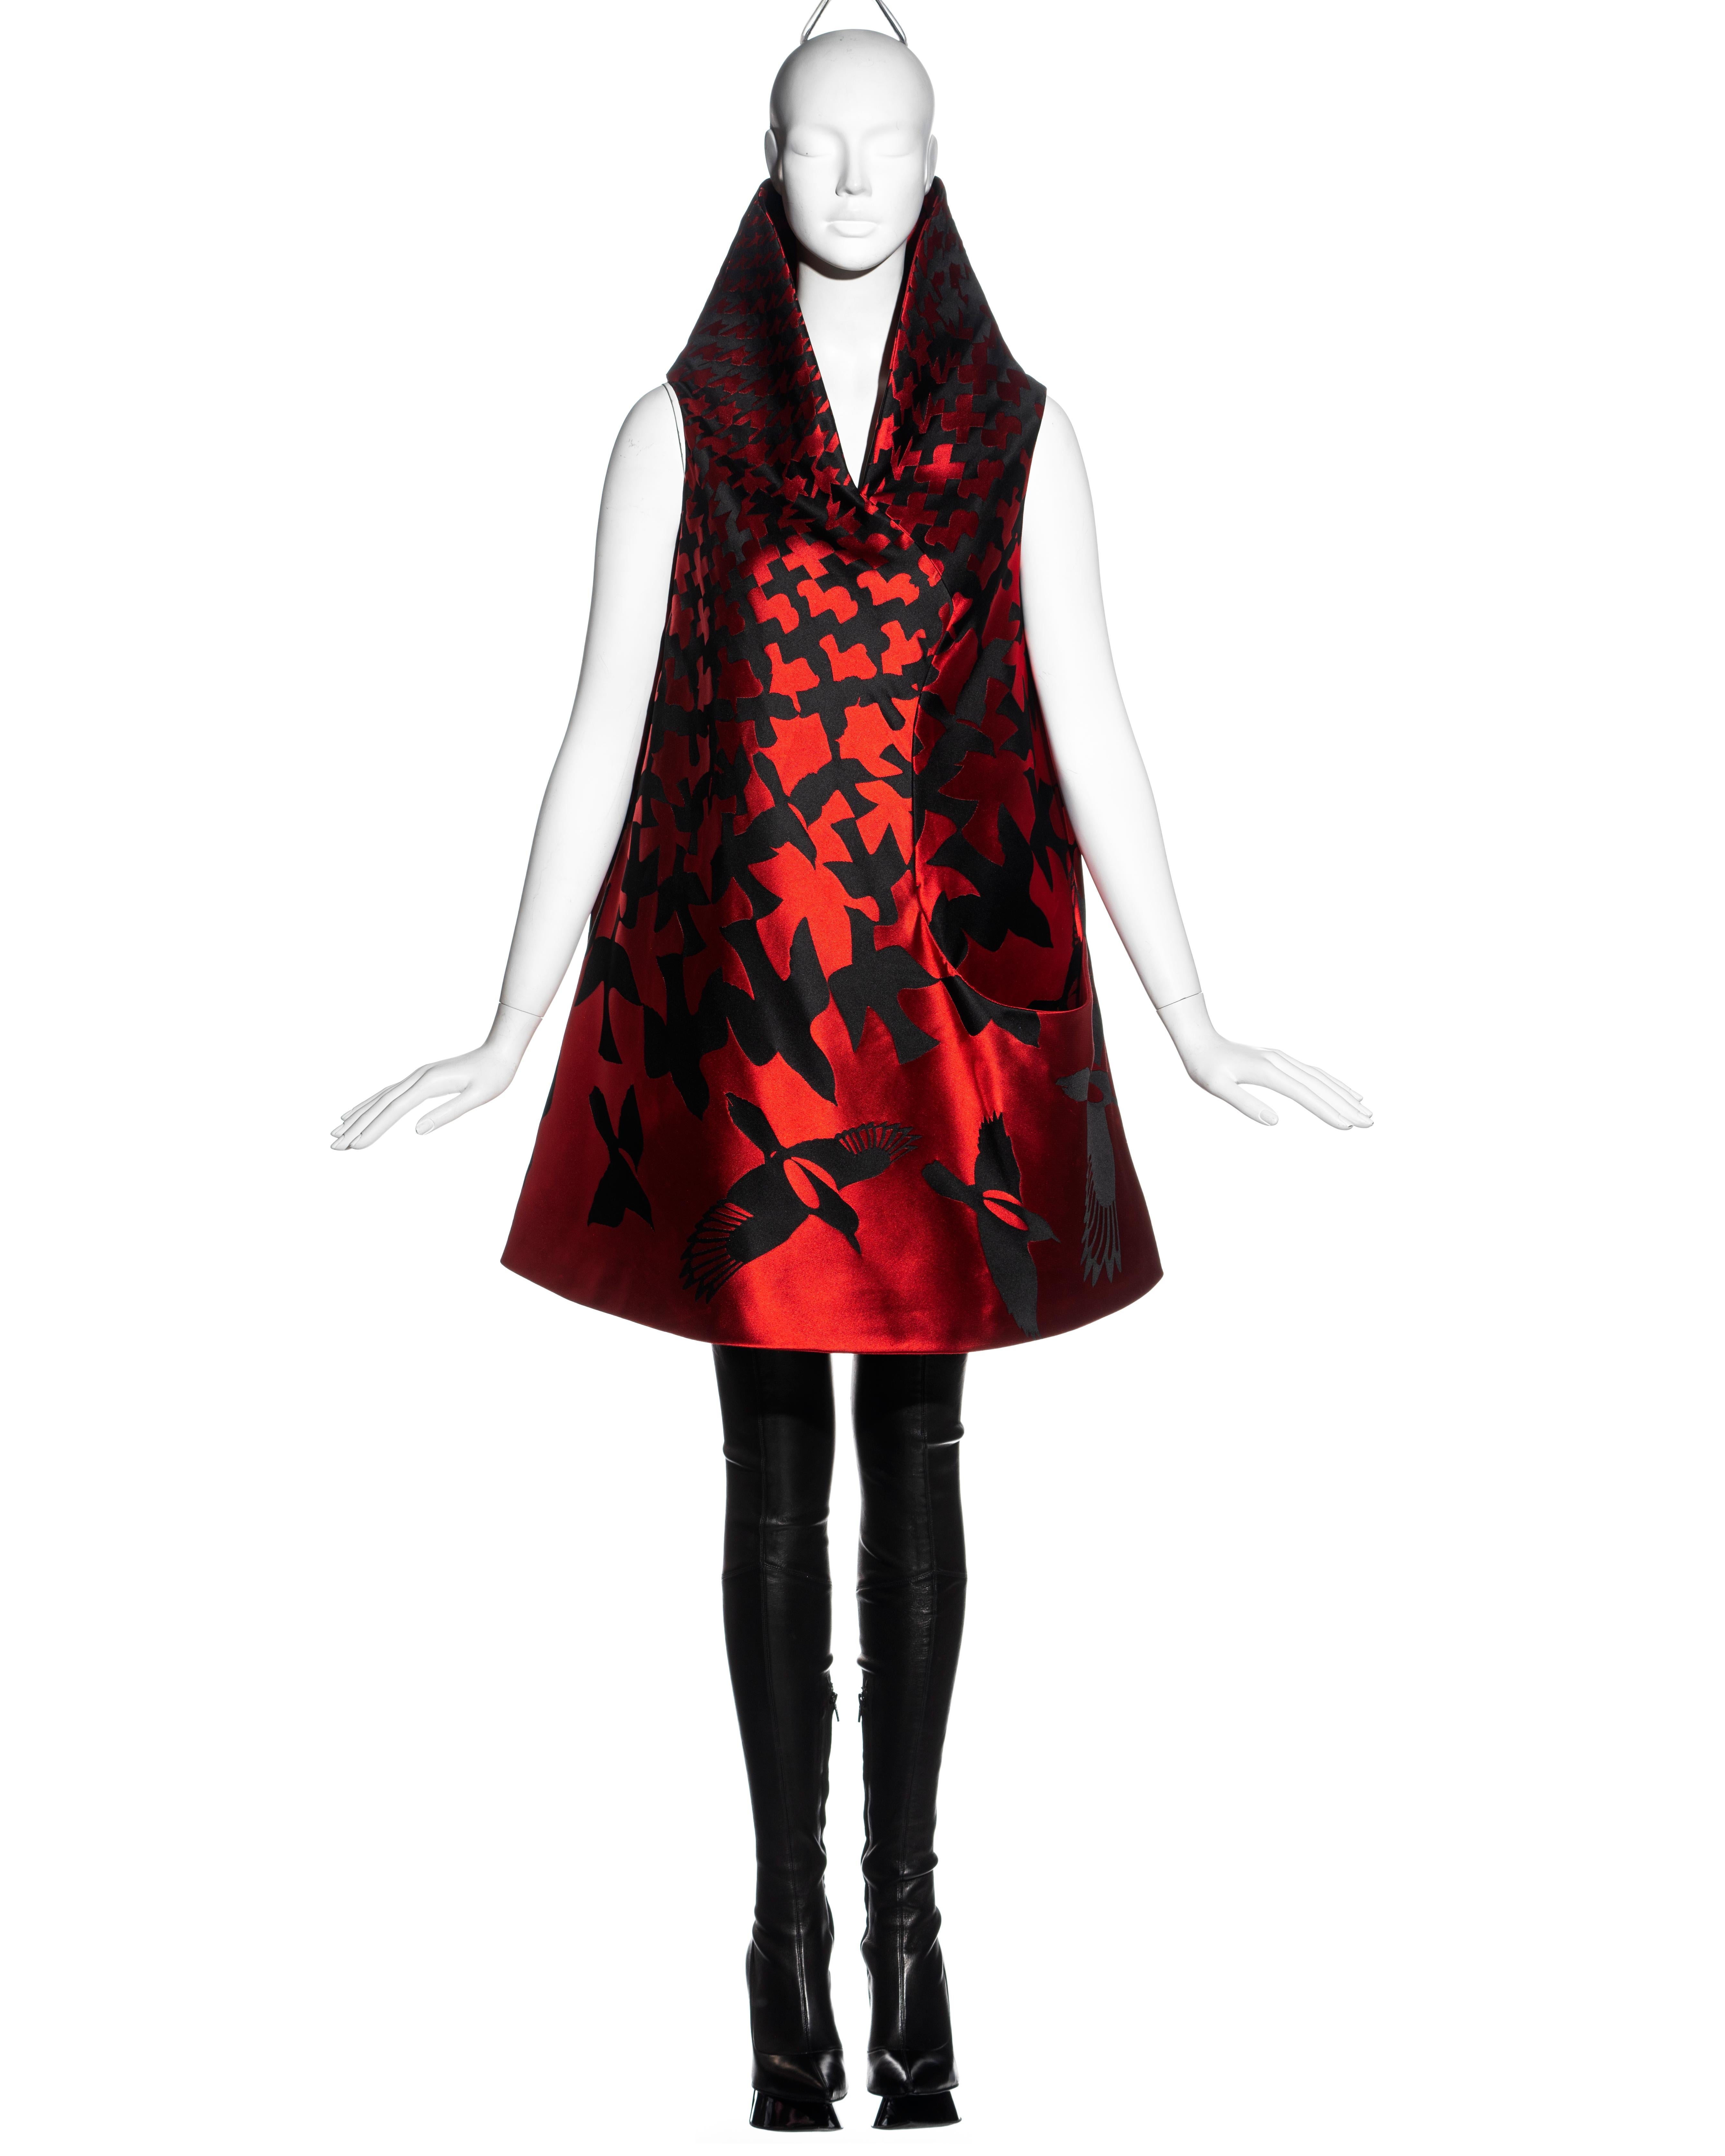 ▪ An important Alexander McQueen 'Horn of Plenty' evening dress
▪ Red and black silk jacquard 
▪ Hound's tooth check print enlarging from the collar, morphing into birds in flight
▪ A-line 
▪ High neck standing collar 
▪ Open pocket at the hip 
▪ IT